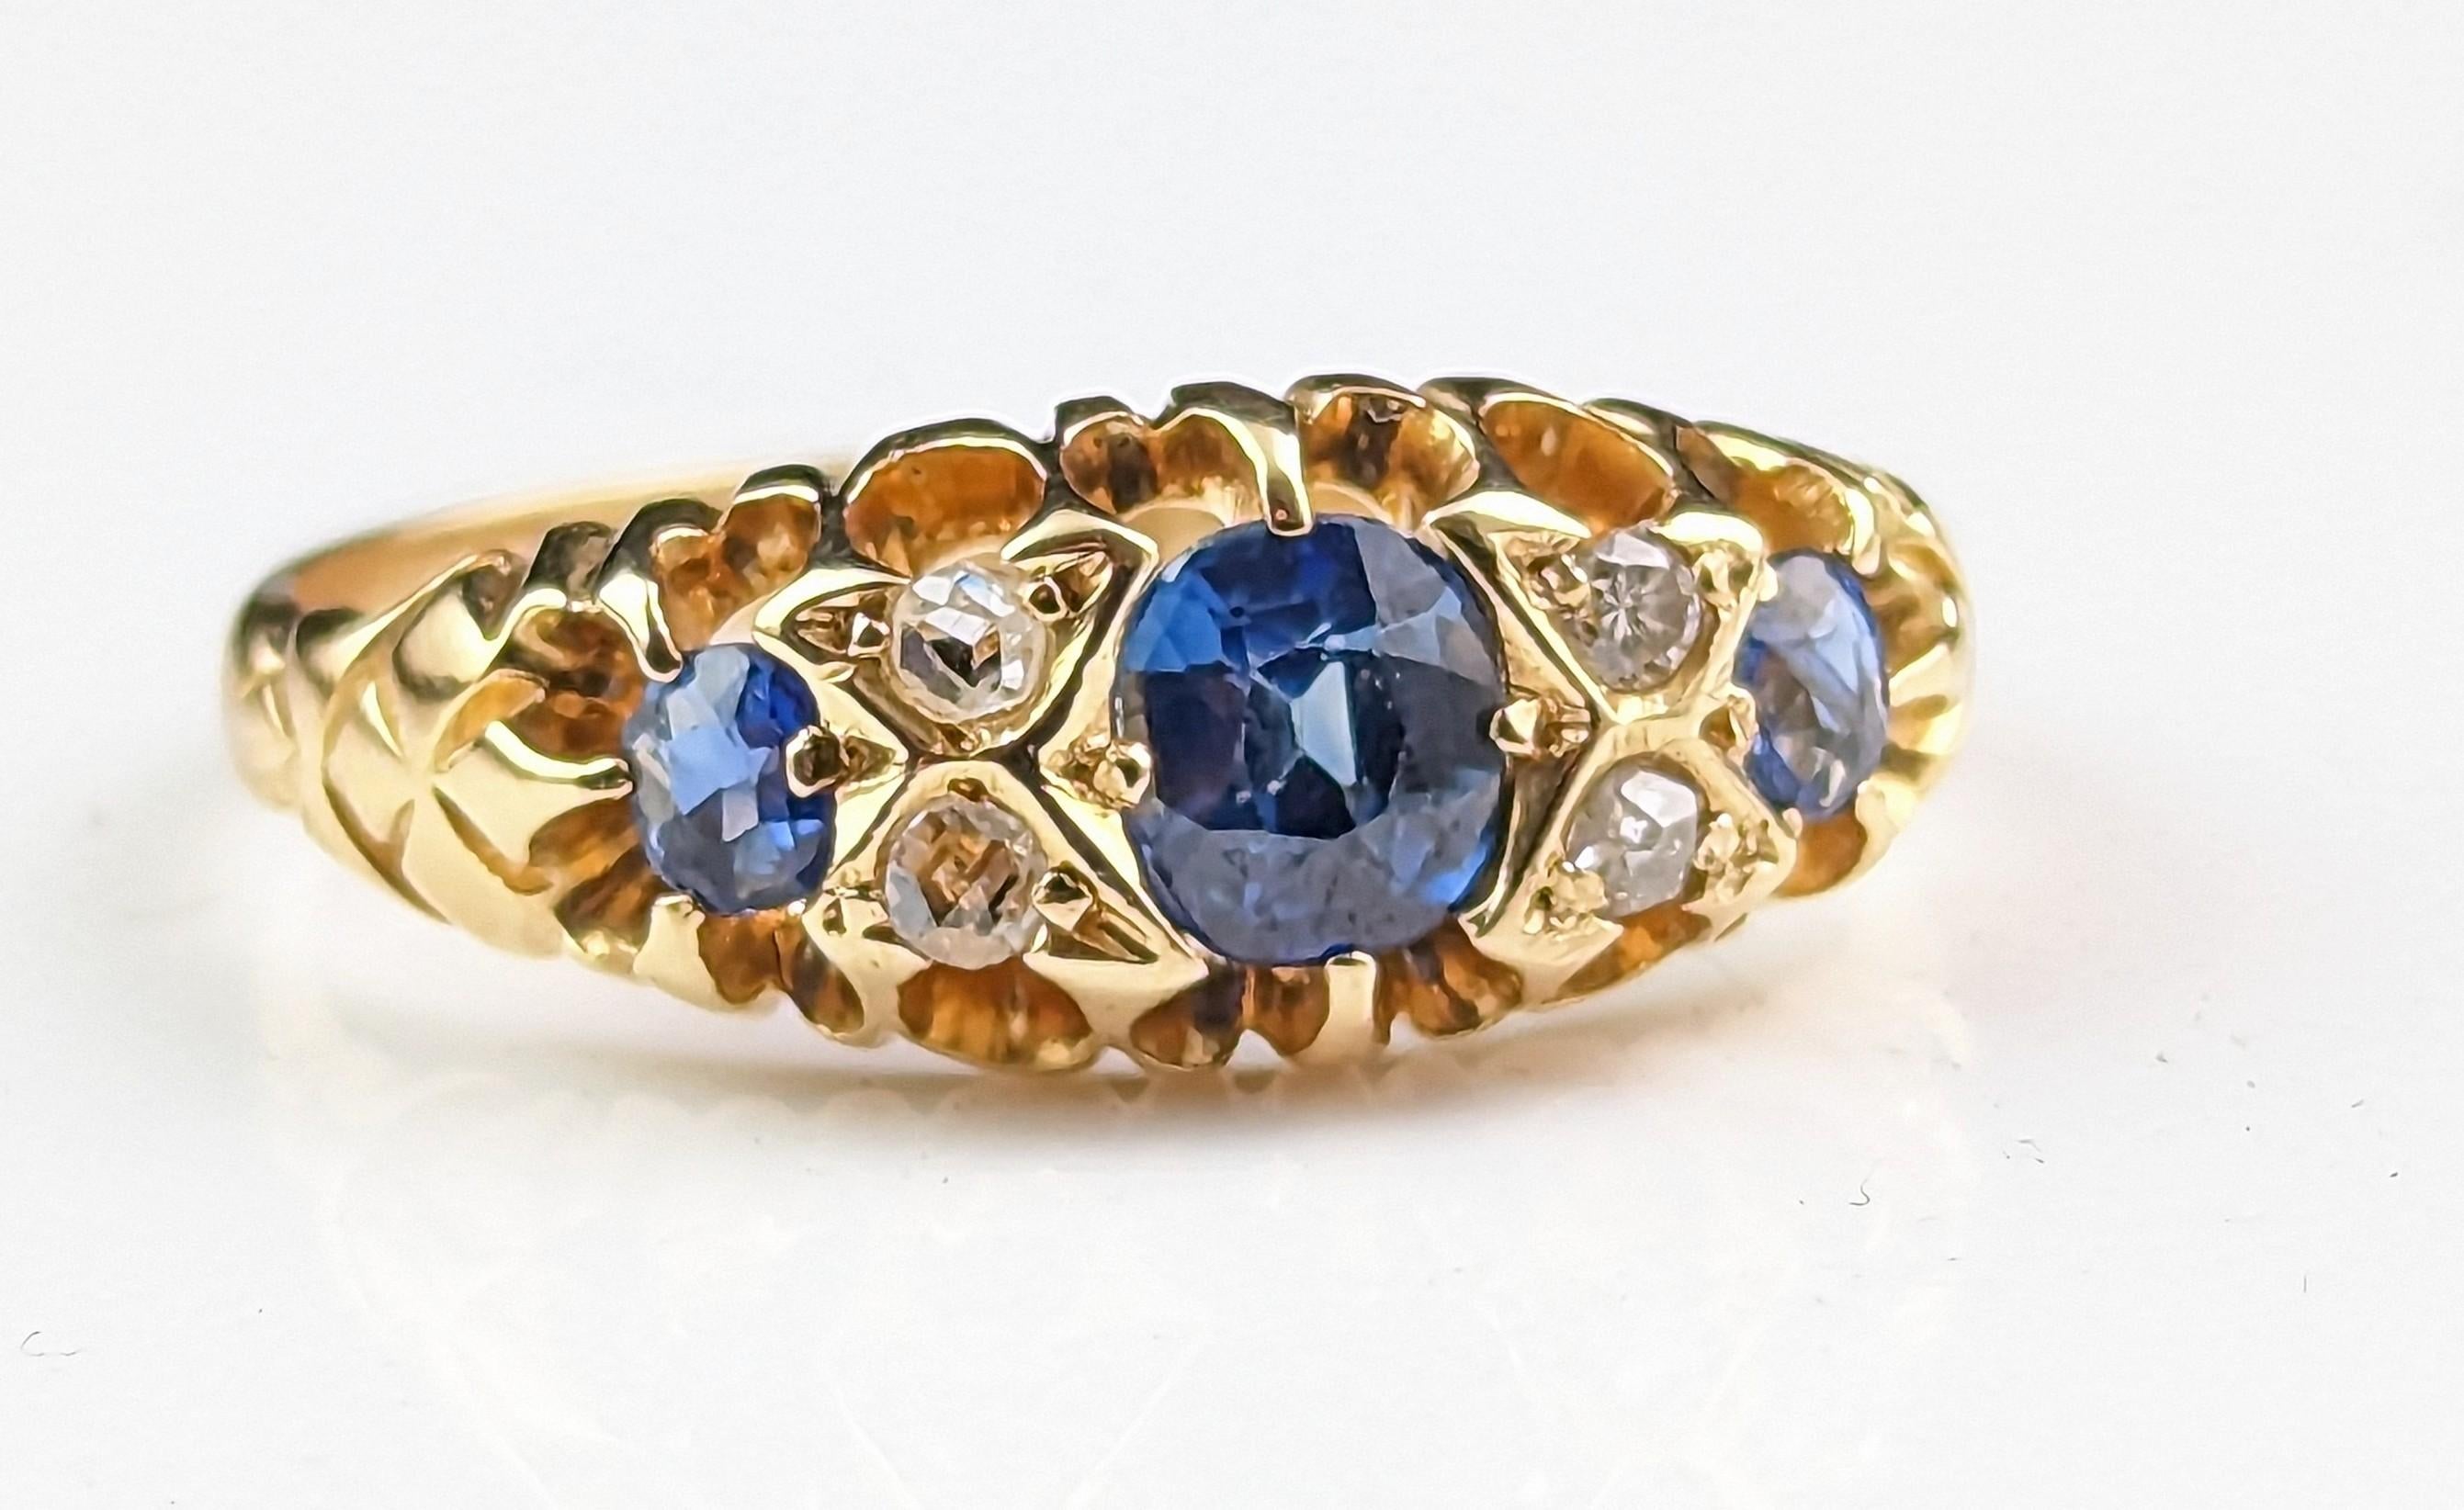 Antique Sapphire and Diamond Ring, 18k Yellow Gold, Victorian 4